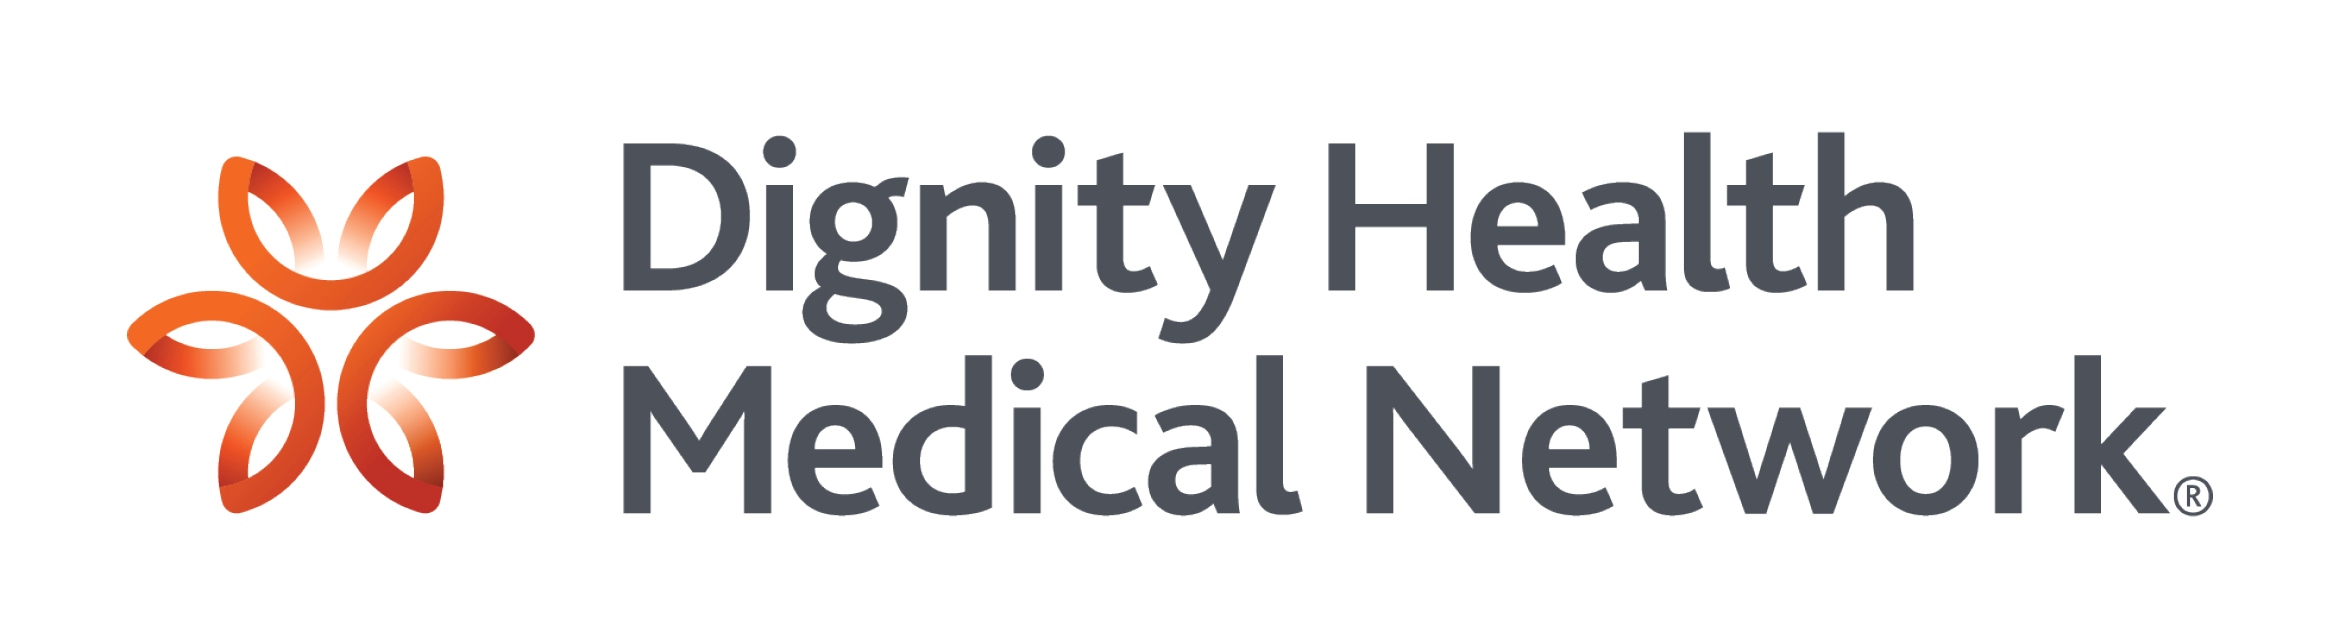 Dignity Health Medical Network